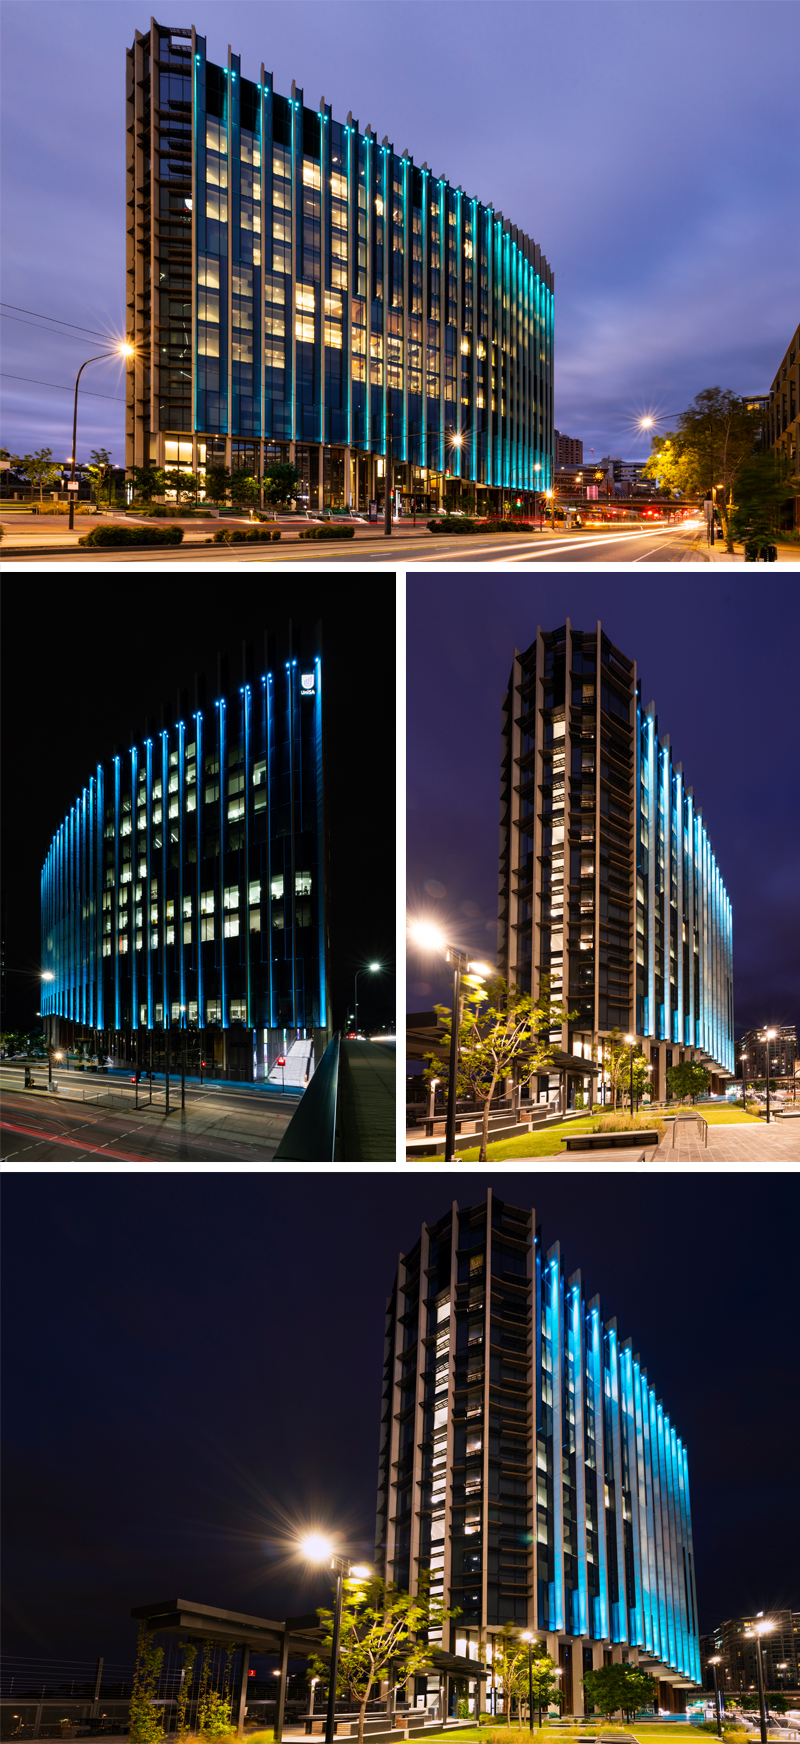 UniSA’s Cancer Research Institute building on North Terrace lit up in teal